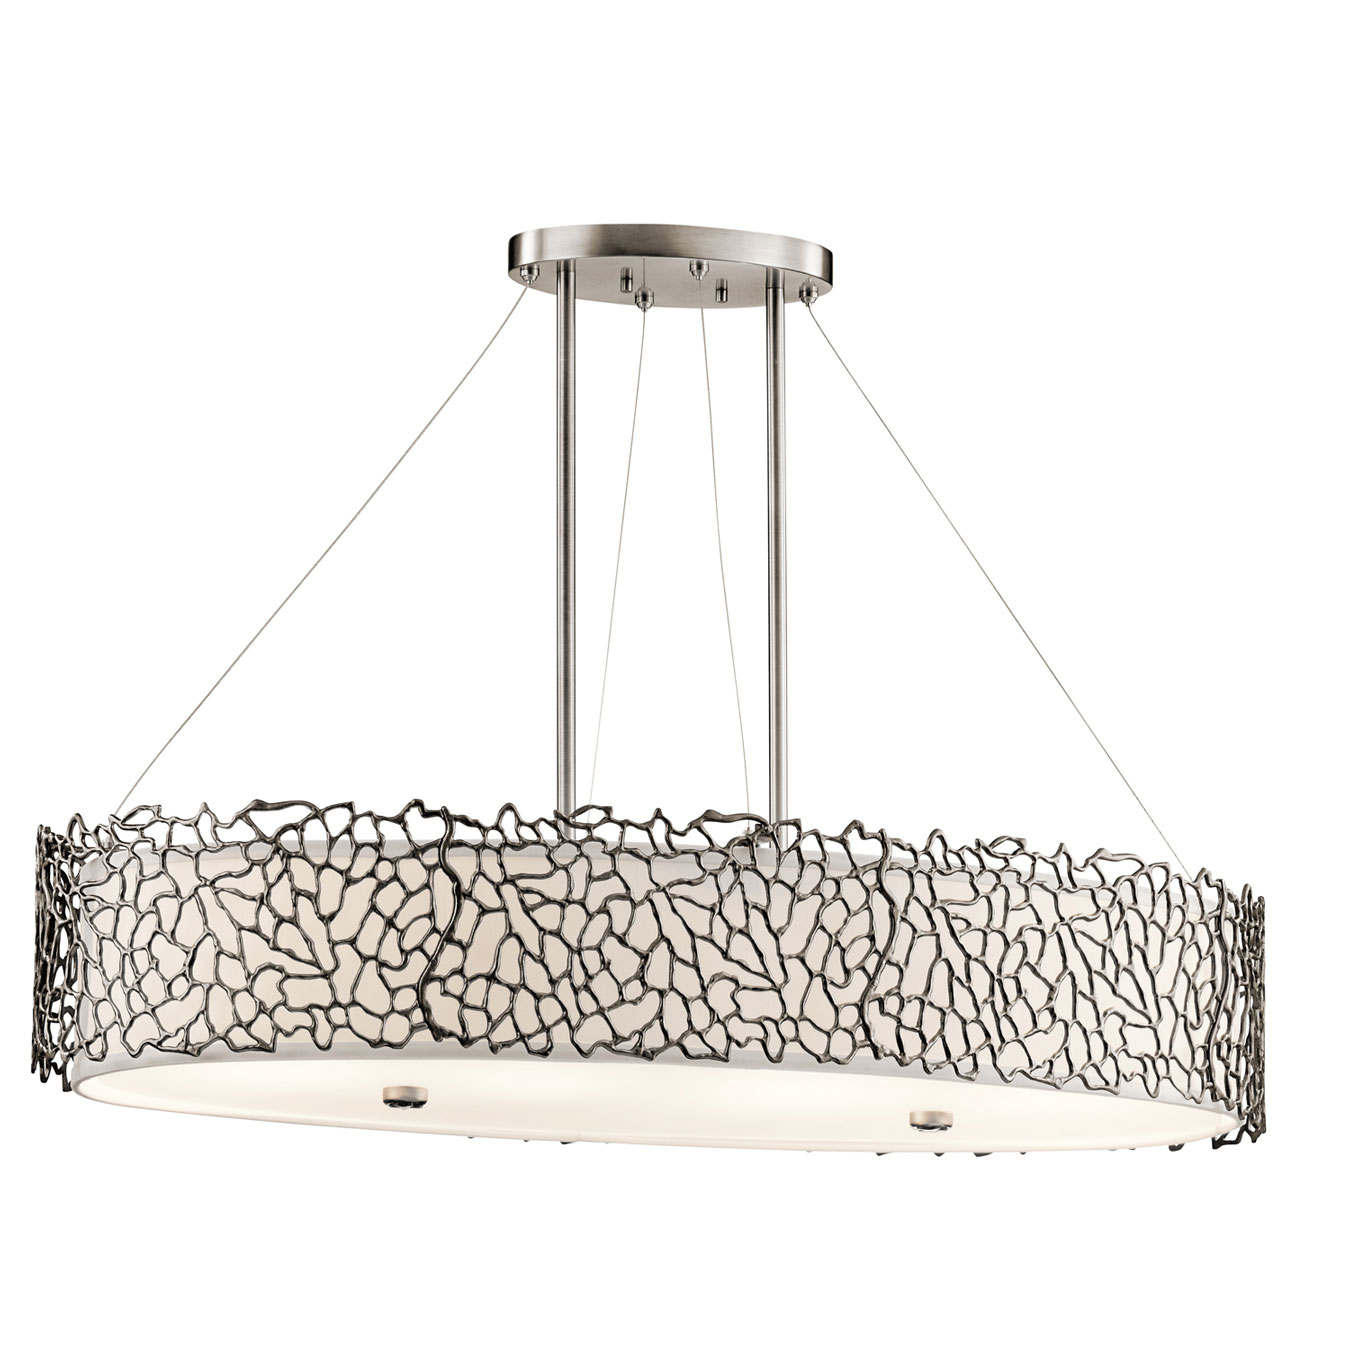 ELSTEAD Silver Coral KL-SILVER-CORAL-ISLE 4 Light Oval Island Light